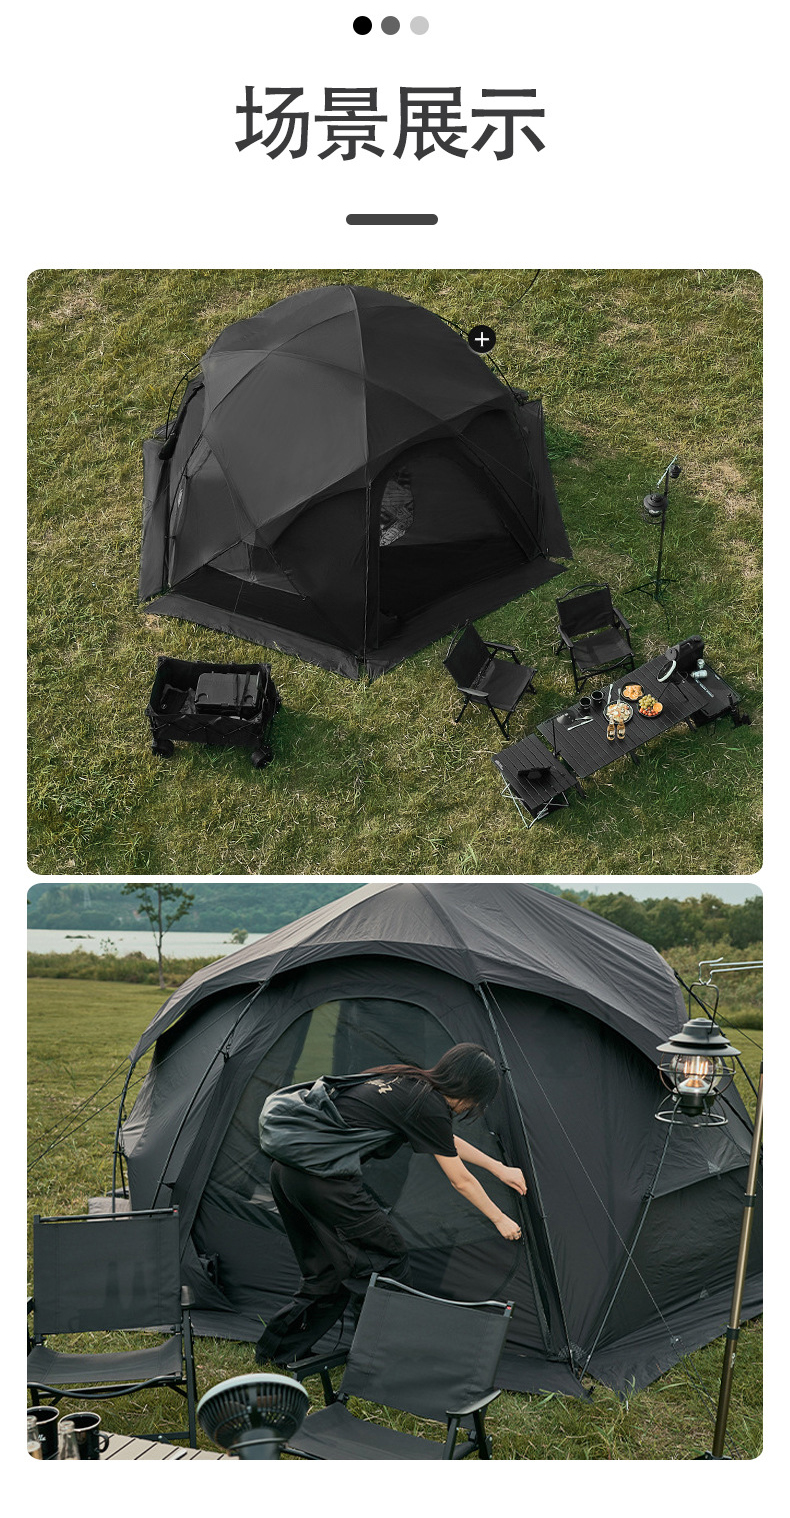 Outdoor Family Overnight Spherical Tent Folding Three Season Outdoor Camping Tent Range